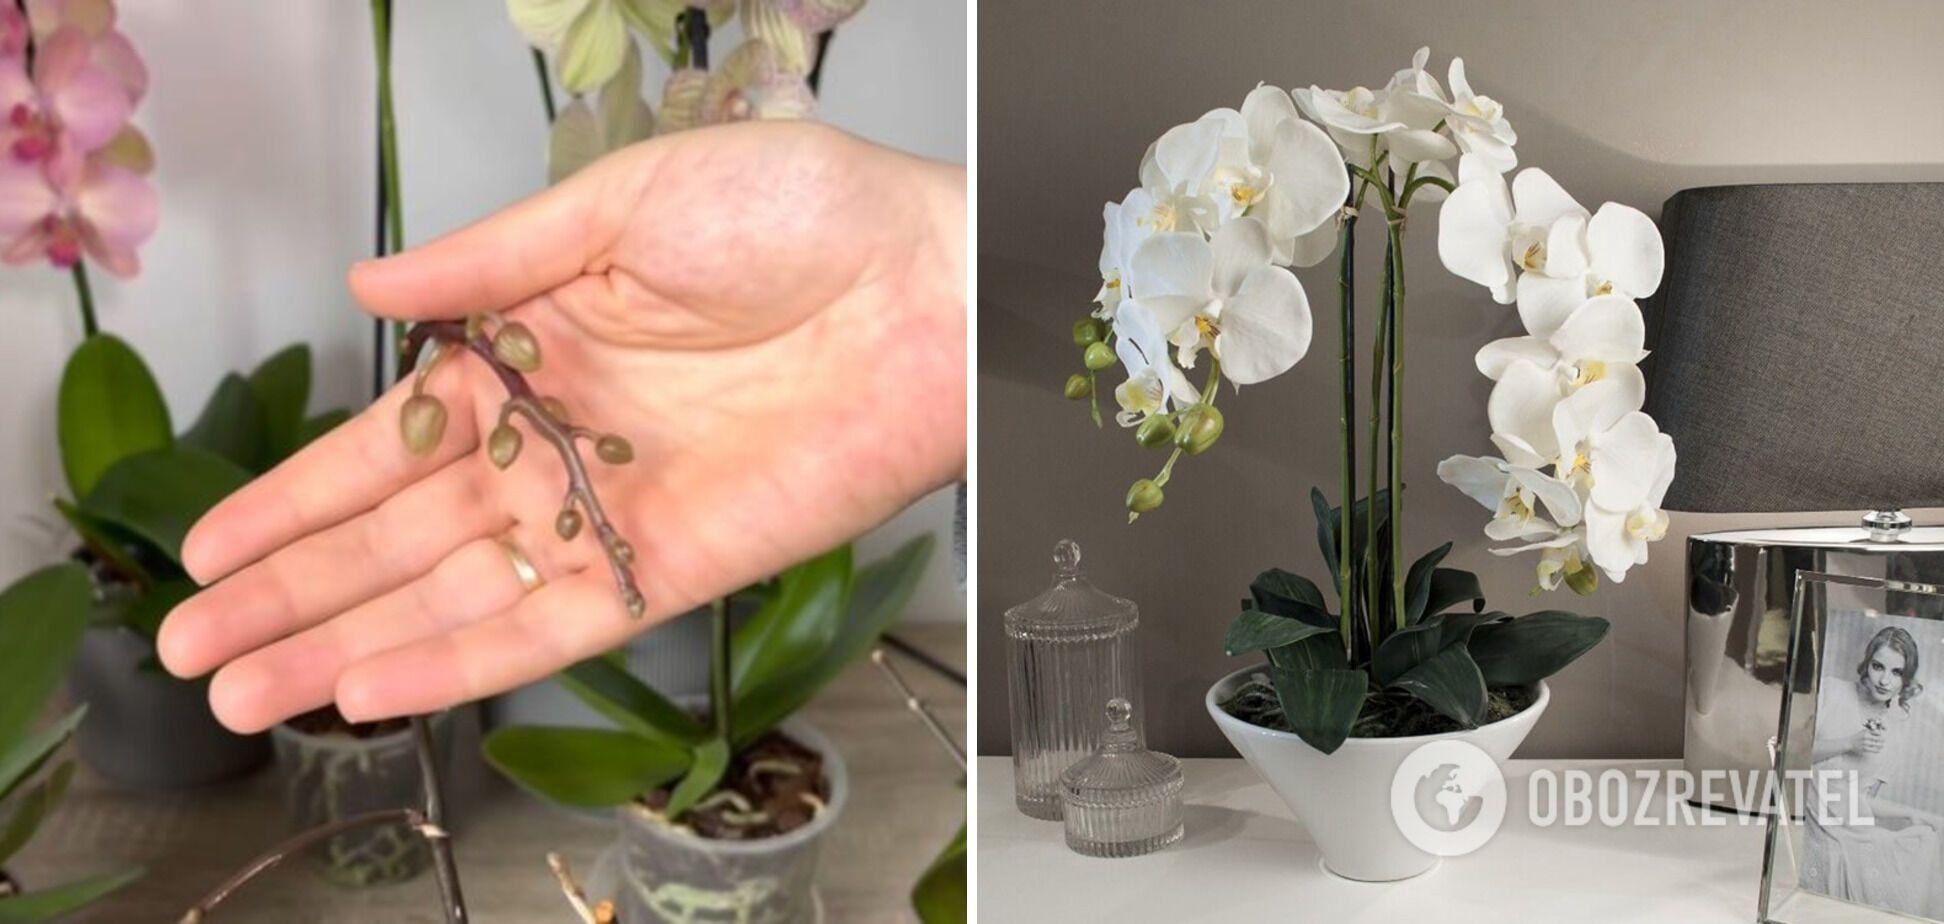 How to awaken dormant orchid buds: an express method